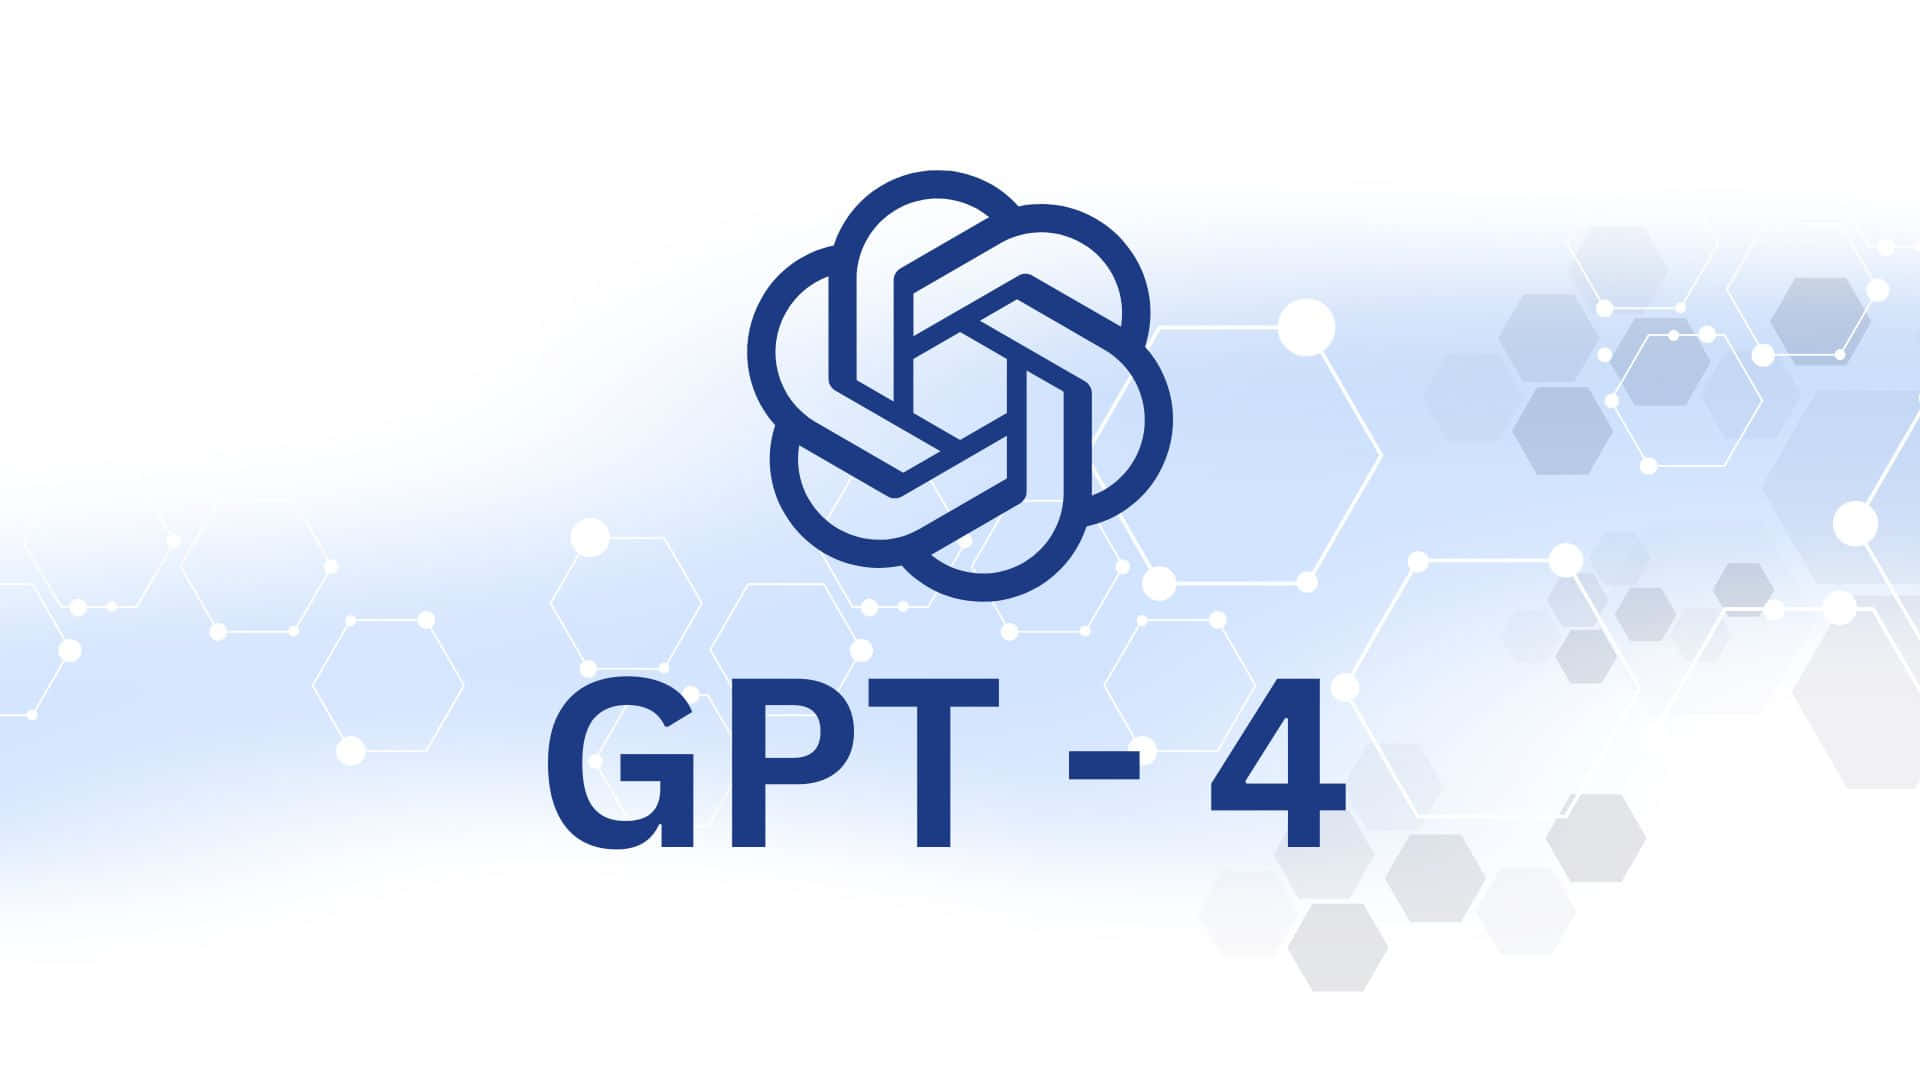 GPT-4 Artificial Intelligence in Action Wallpaper